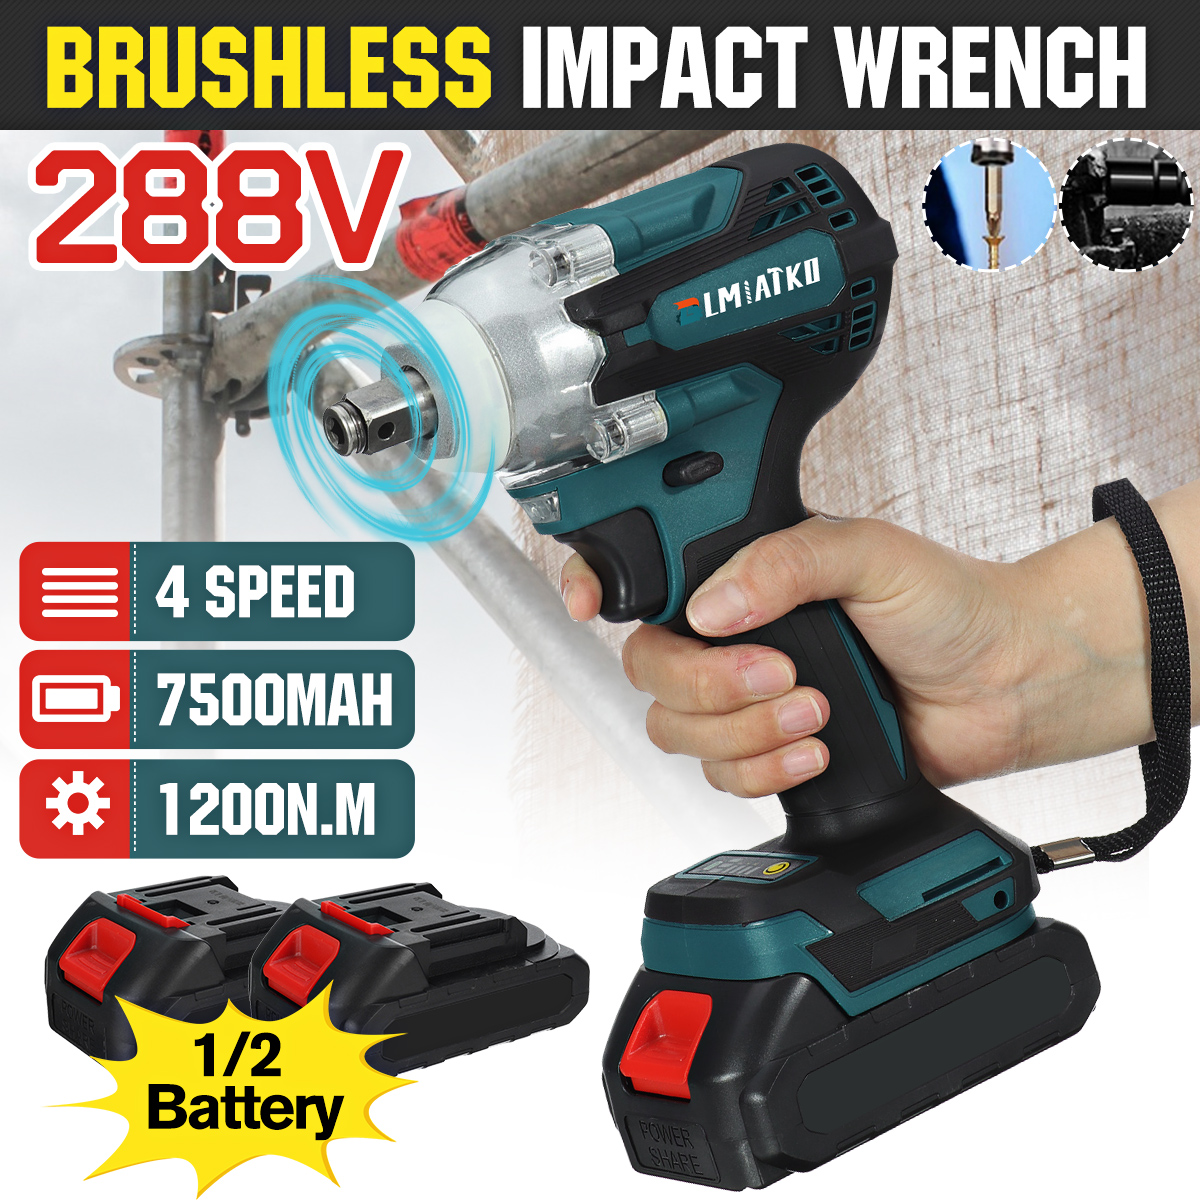 4-Speed-Brushless-Cordless-Electric-Impact-Wrench-with-Battery-1200NM-Rechargeable-12inch-Torque-Wre-1843508-1